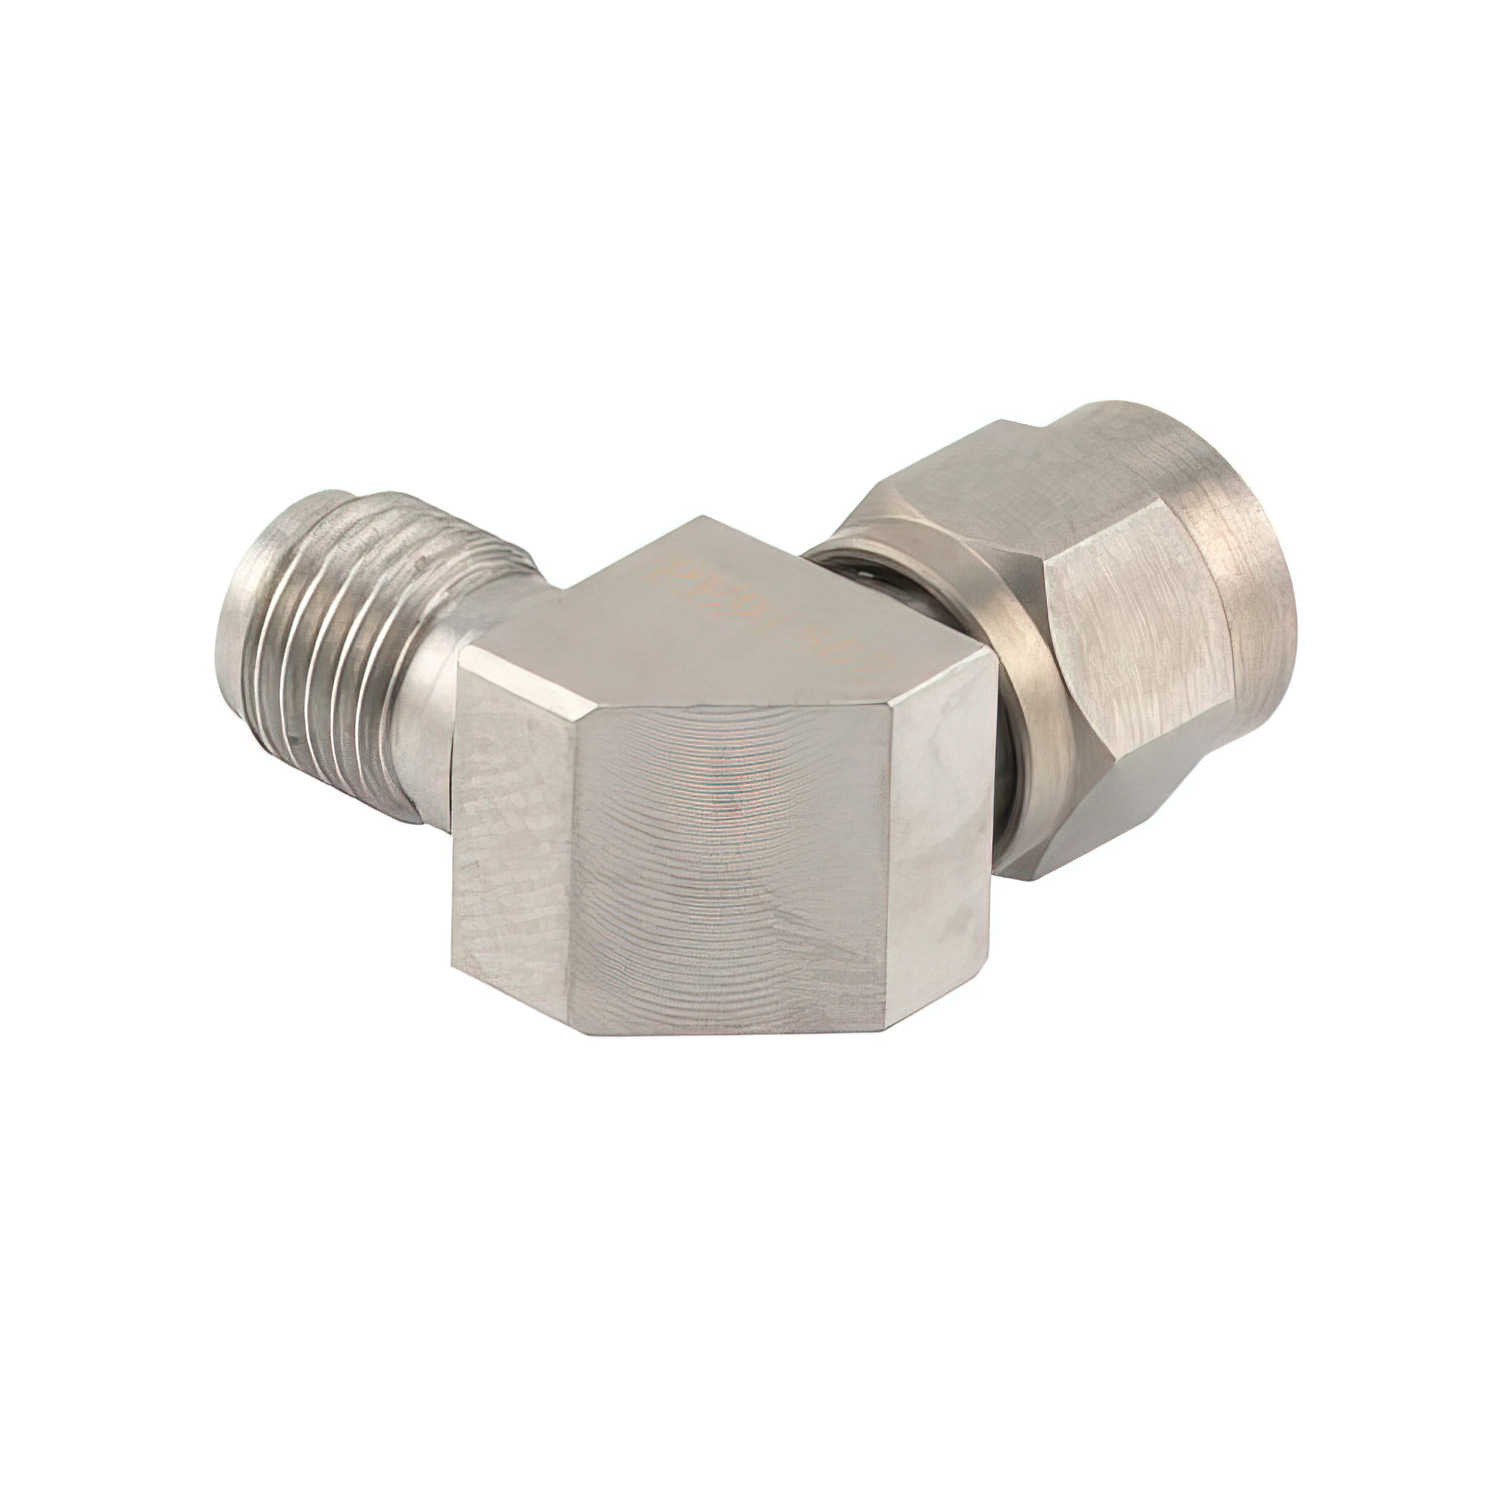 2.4mm Male to 2.92mm Female Miter Right Angle Adapter2